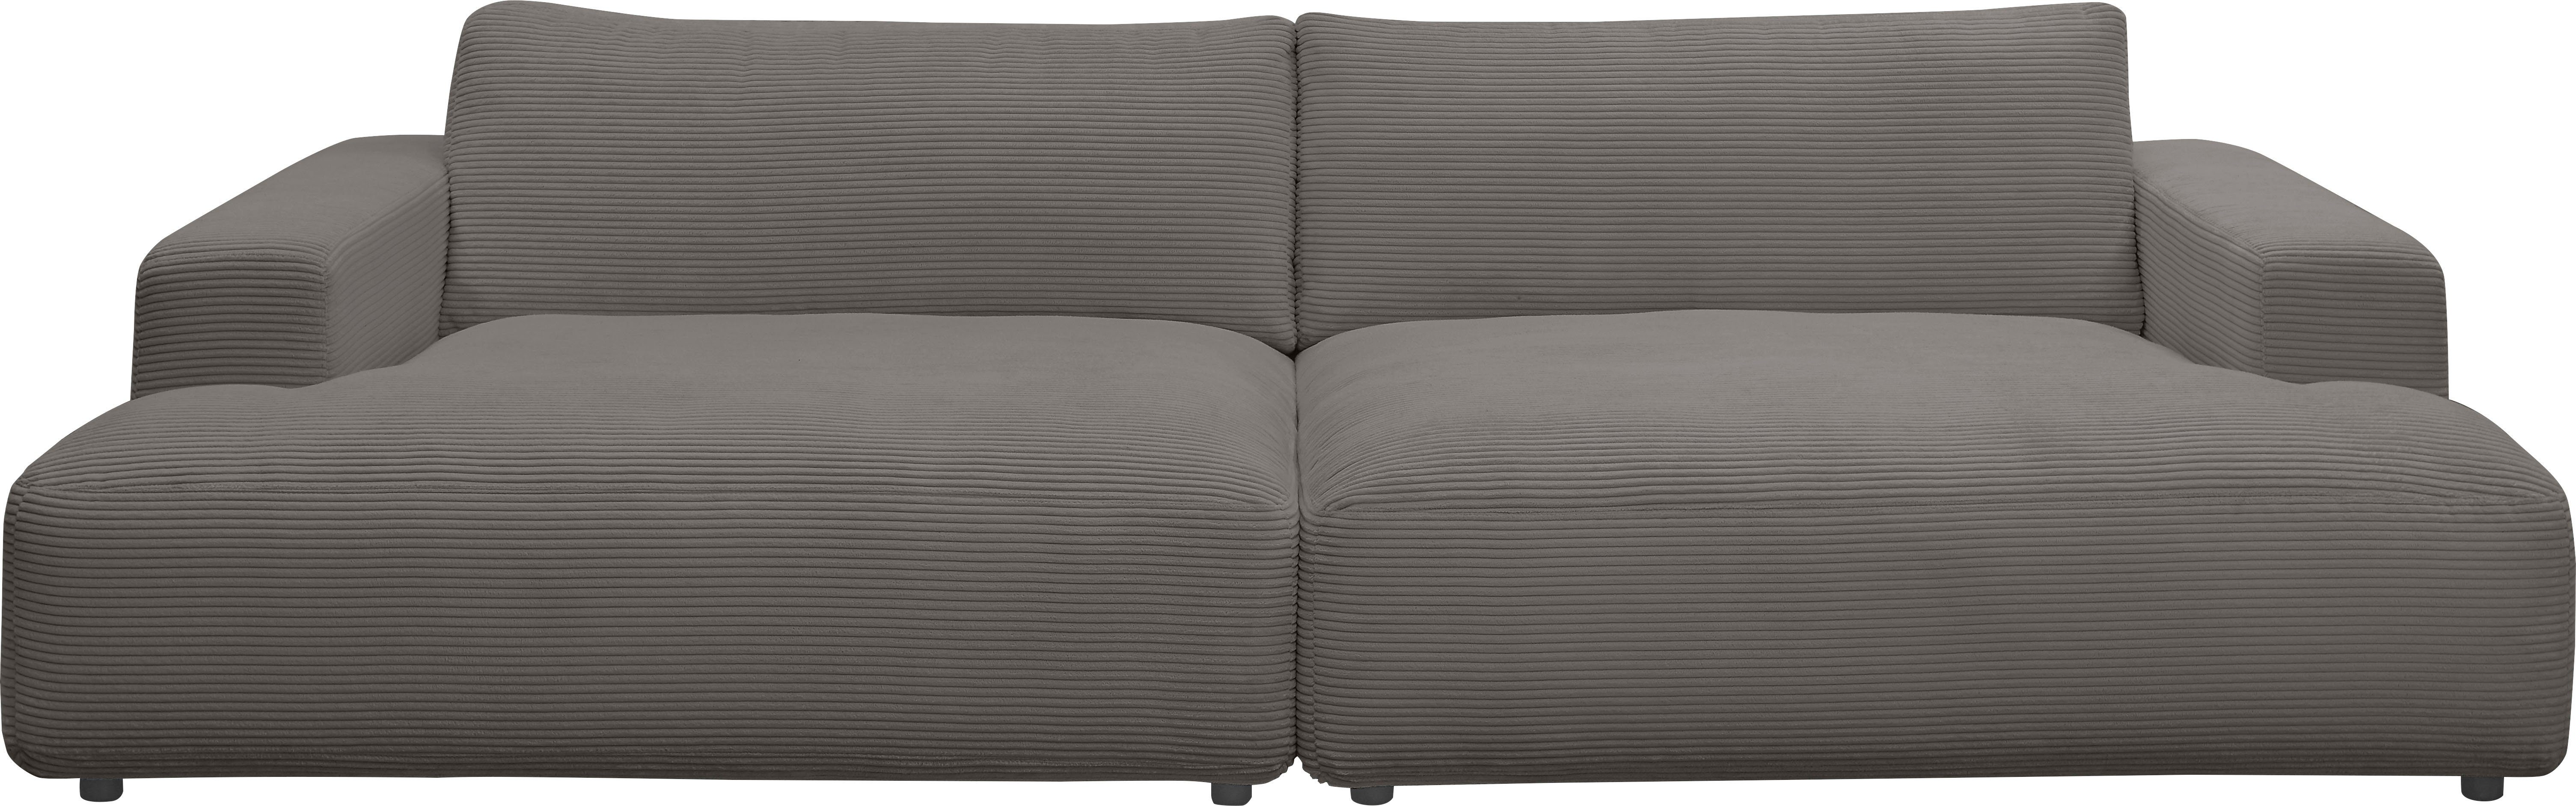 Musterring Cord-Bezug, Breite M GALLERY Loungesofa by Lucia, 292 cm branded